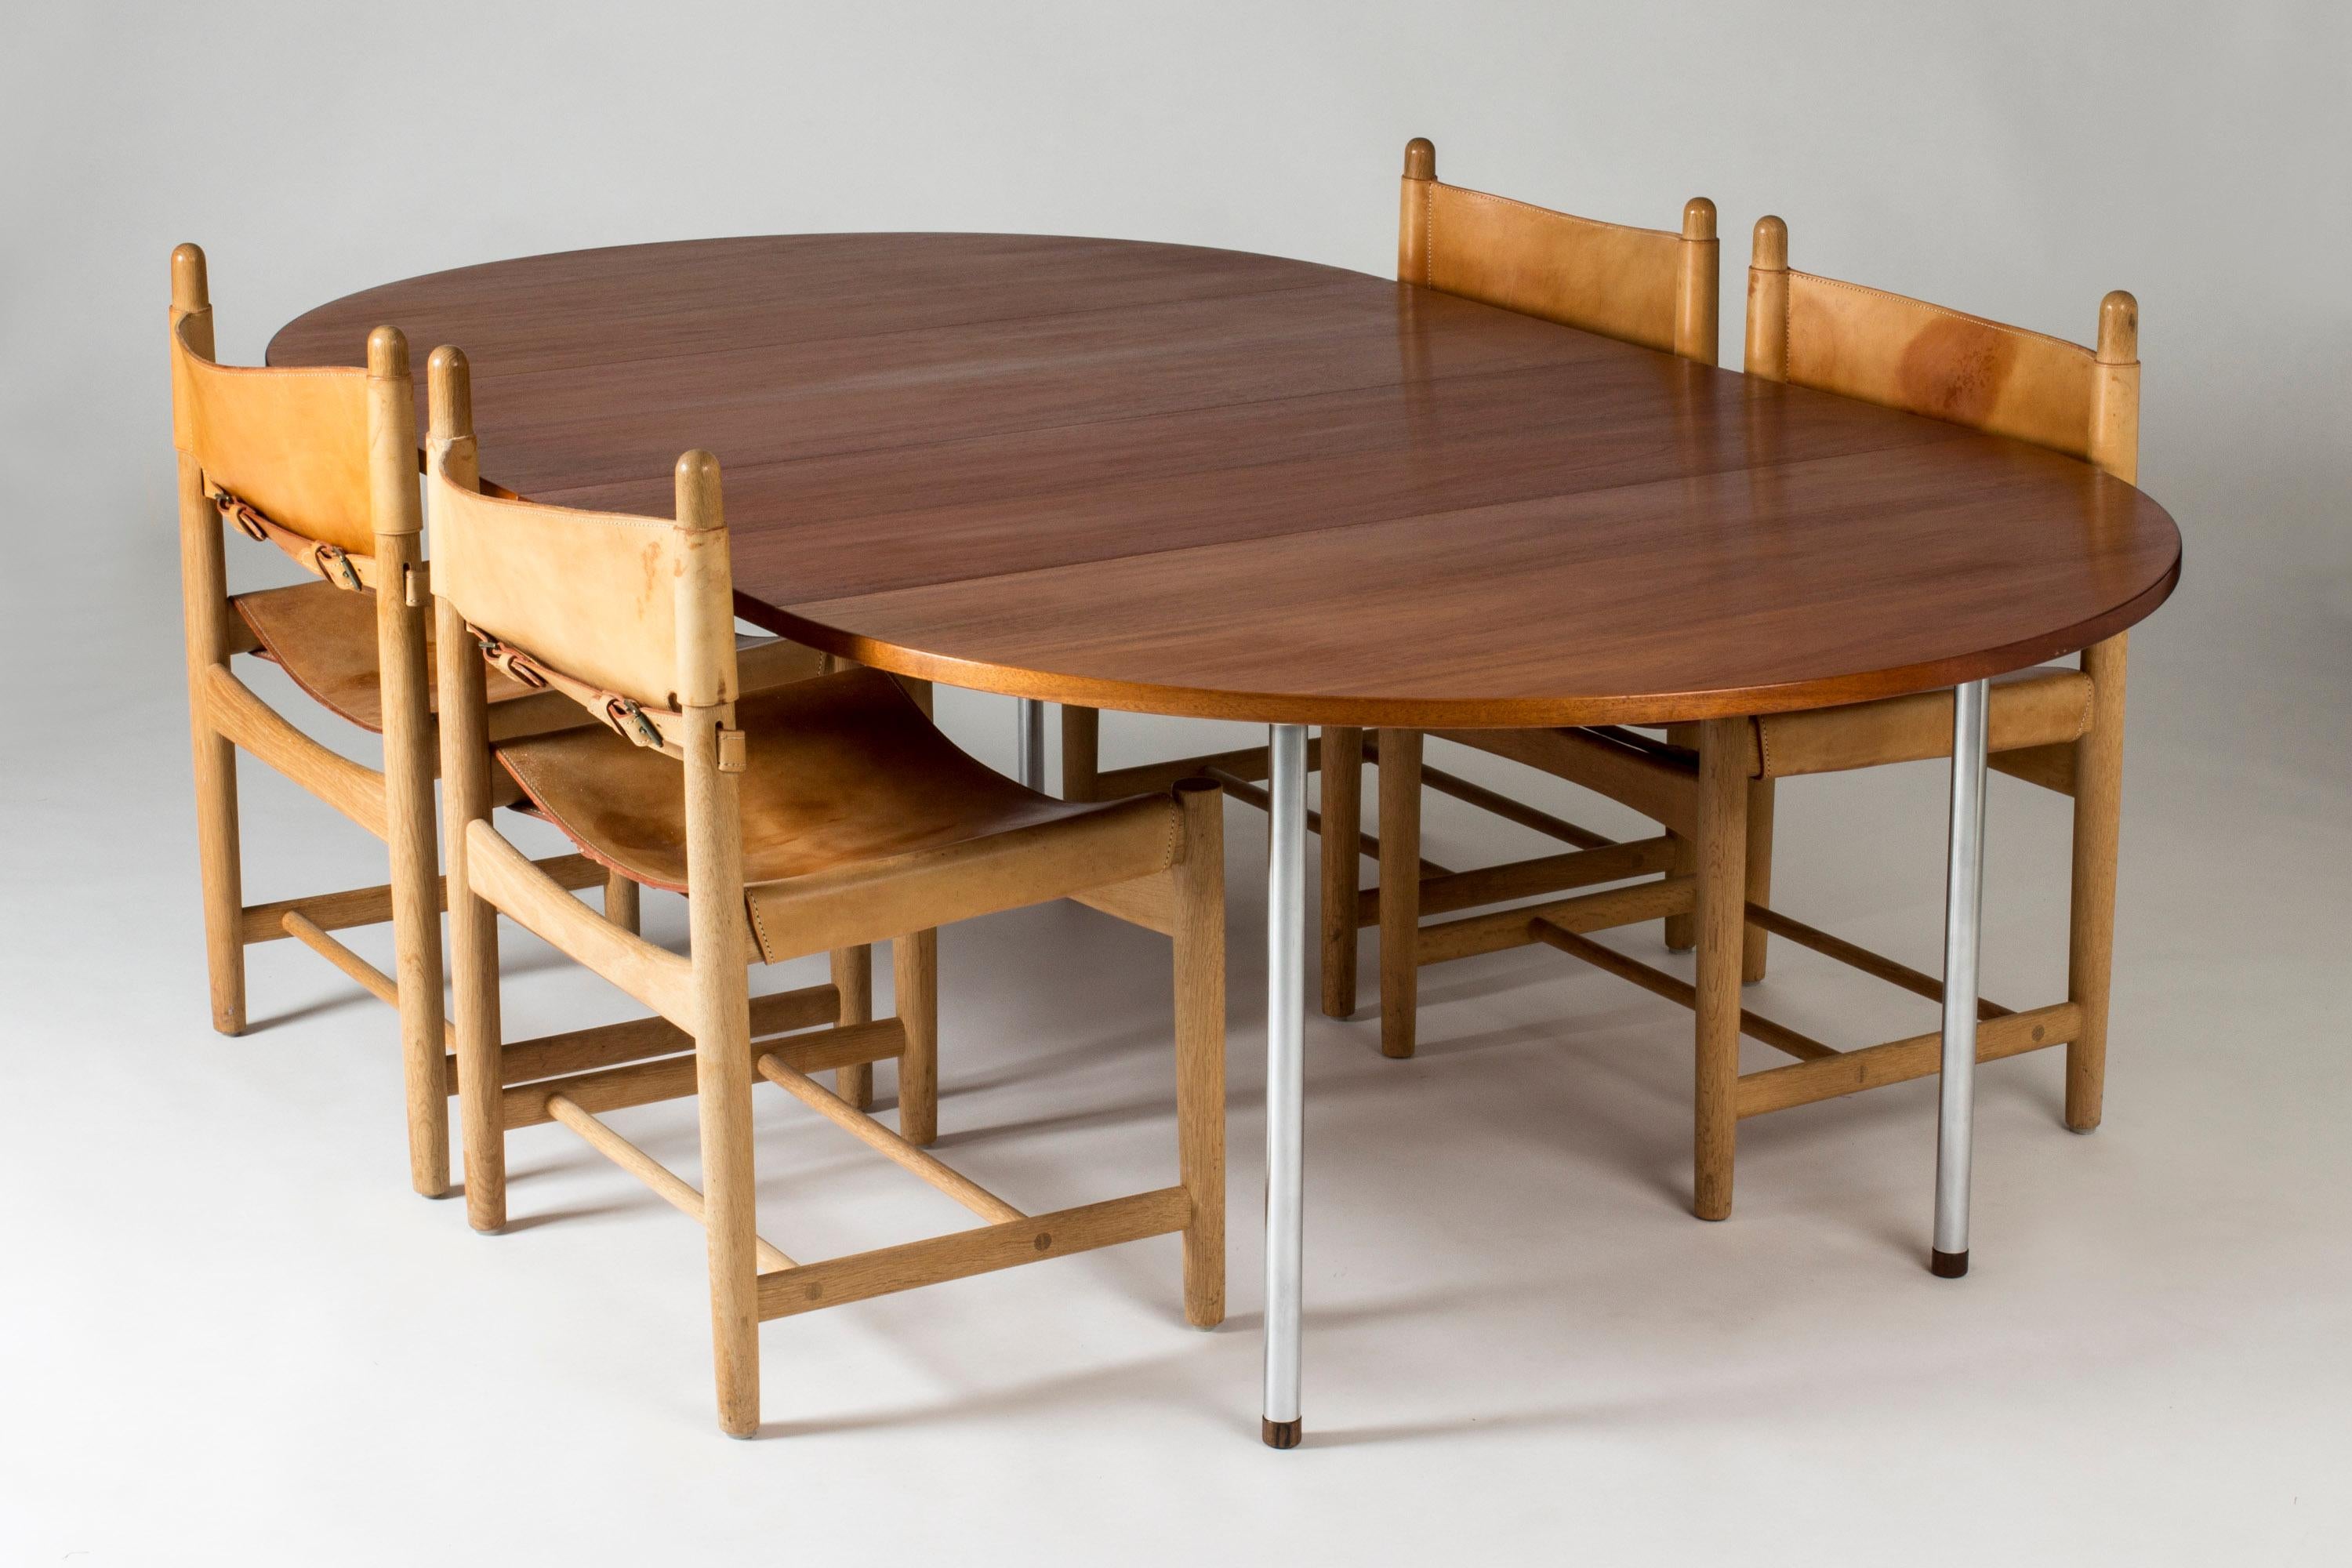 Teak dining table by Hans J. Wegner, in a sleek versatile design. The round neat size can be extended into a generous dining table seating ten people comfortably. Steel legs with wooden ends.